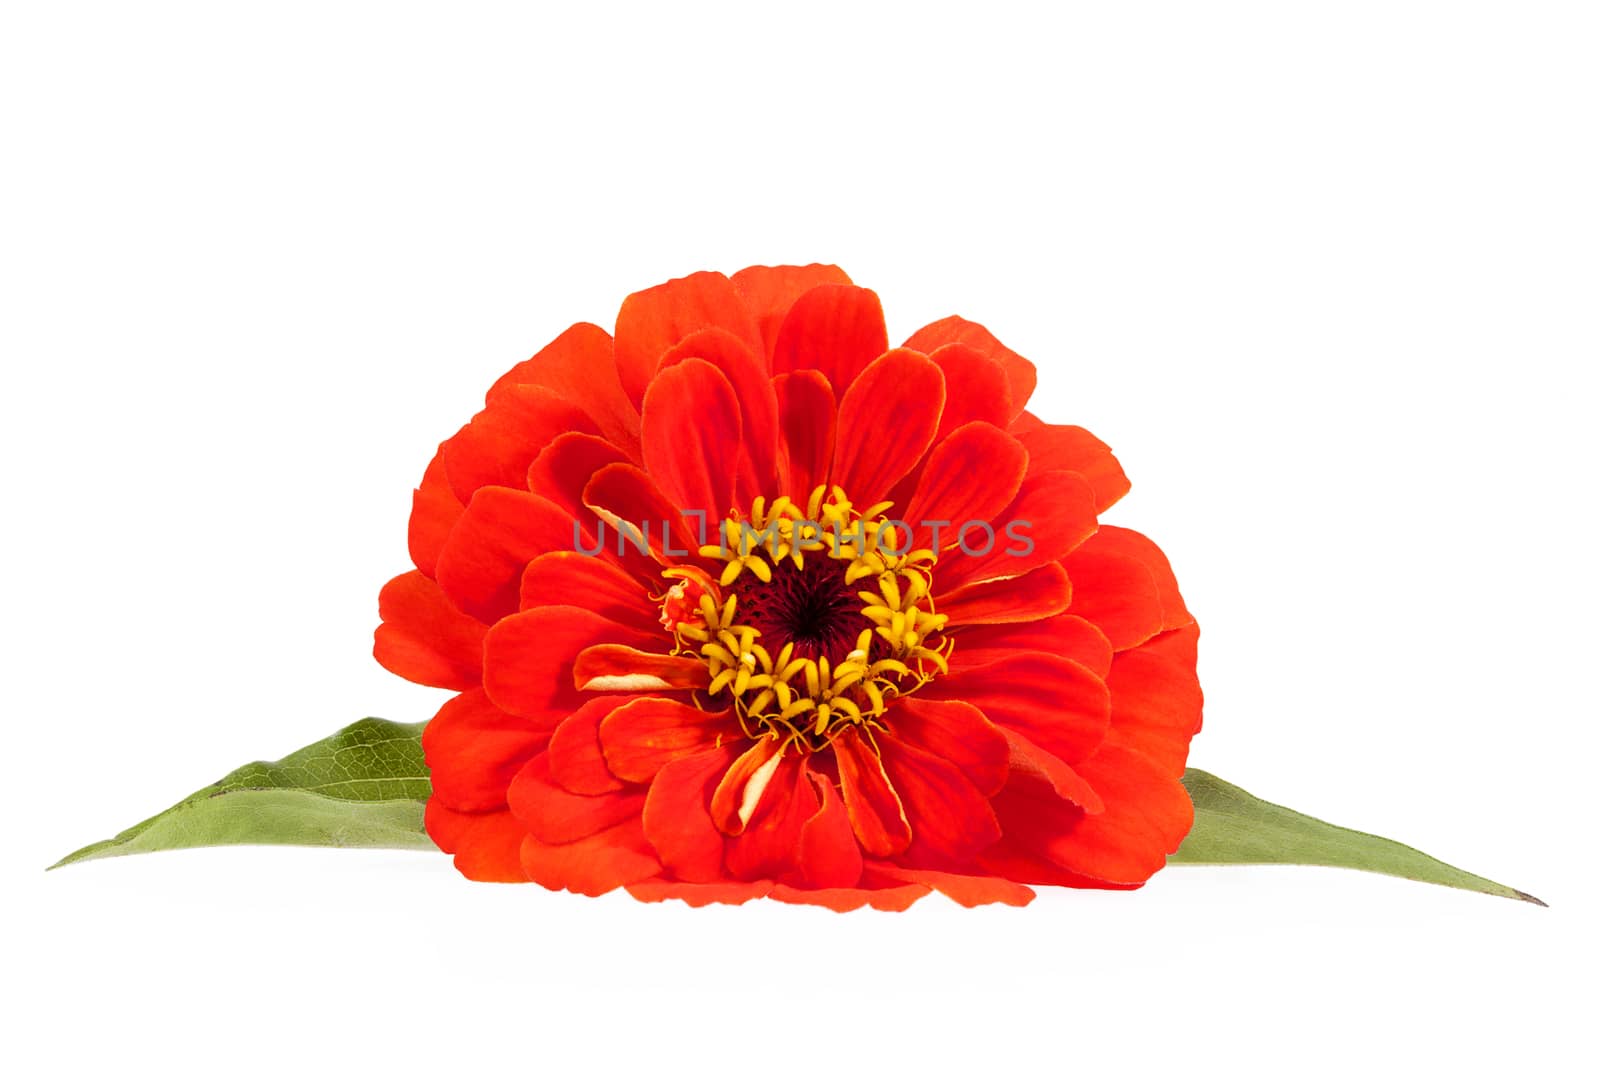 Flower of red zinnia isolated on white background, close up